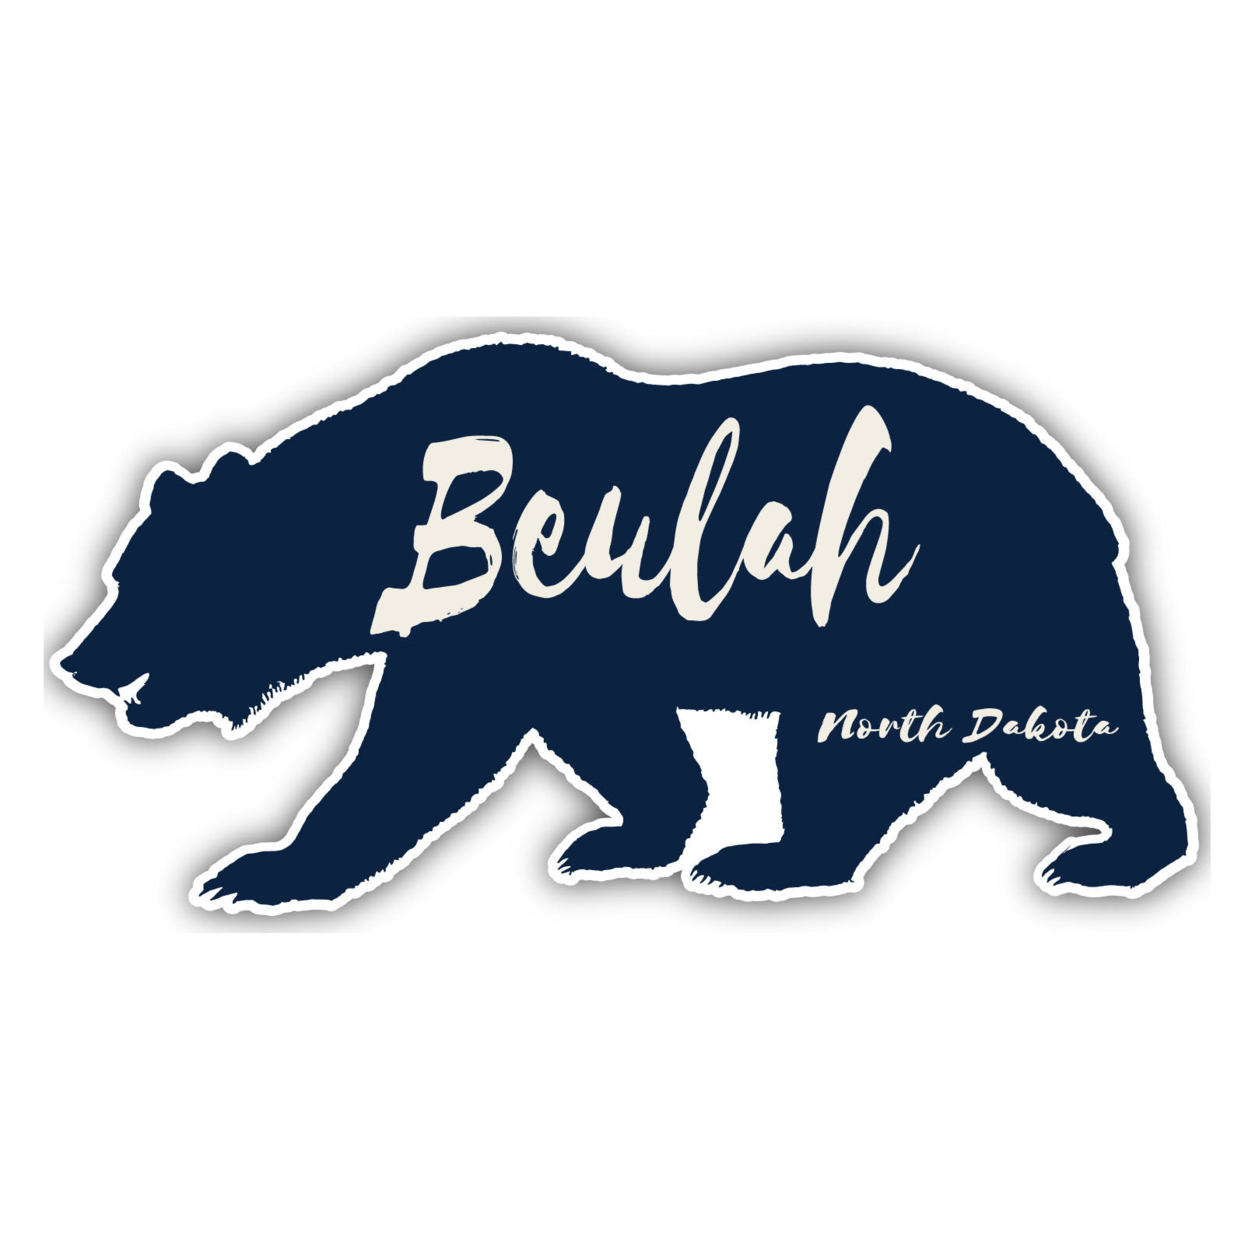 Beulah North Dakota Souvenir Decorative Stickers (Choose Theme And Size) - 4-Pack, 4-Inch, Great Outdoors